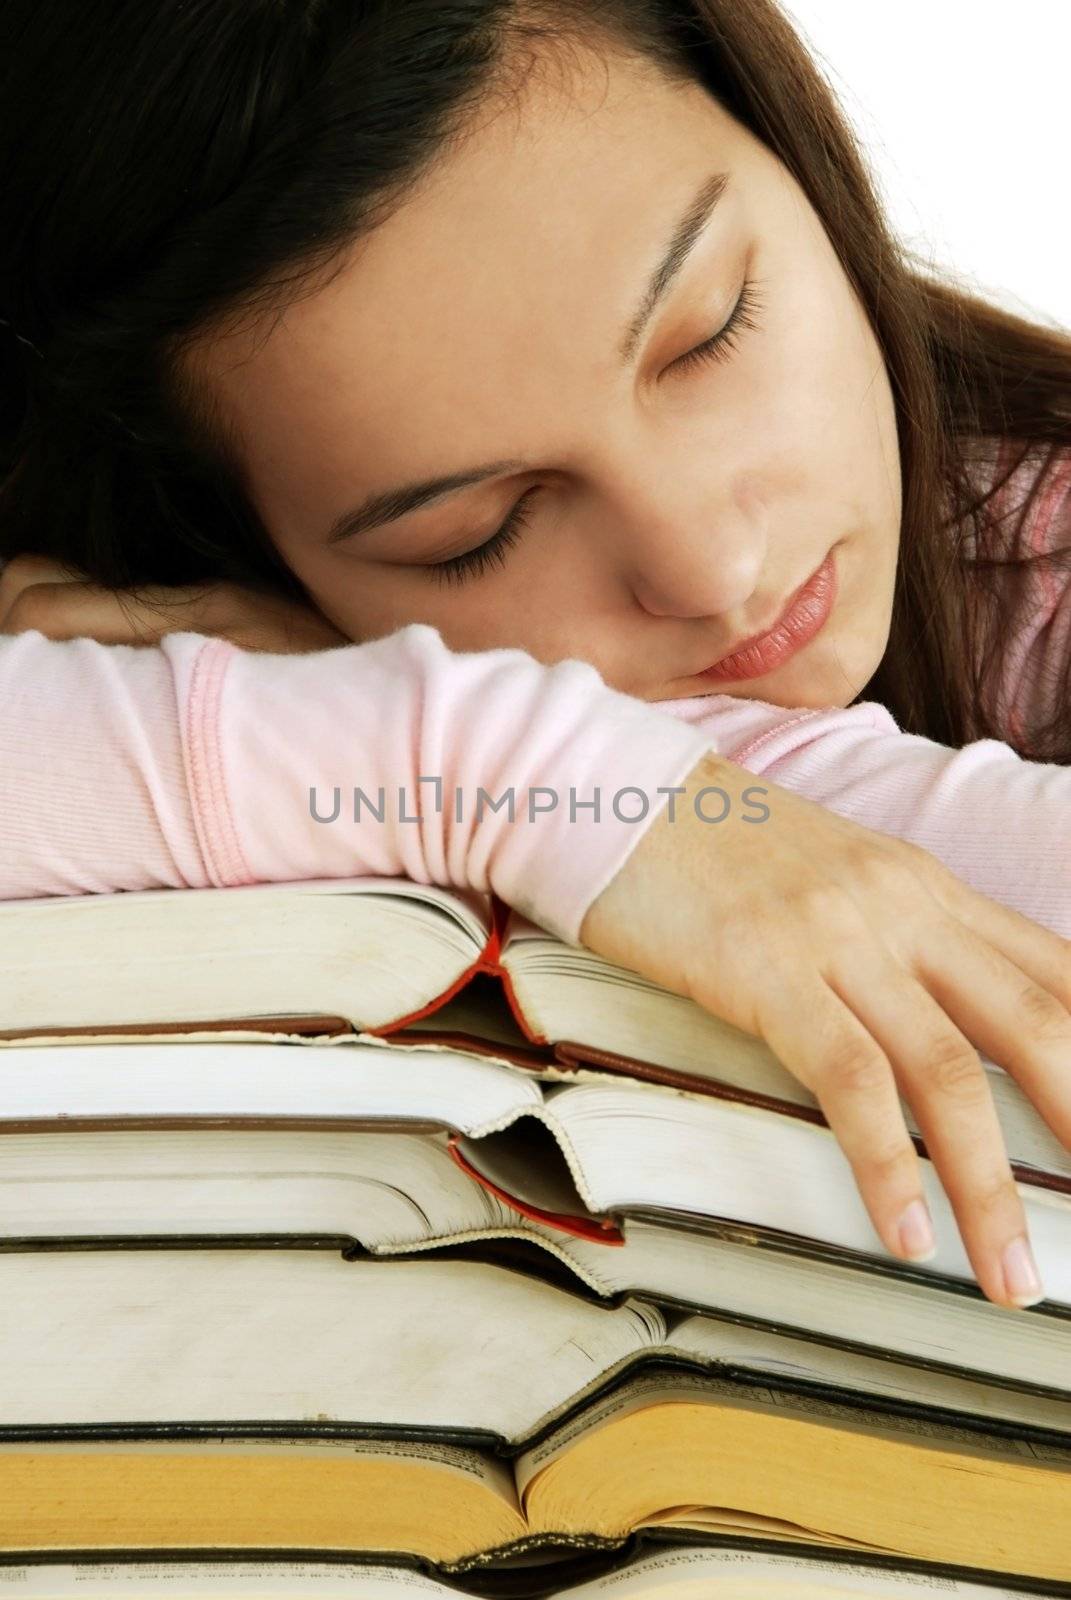 Tired girl sleeping on books stack by simply